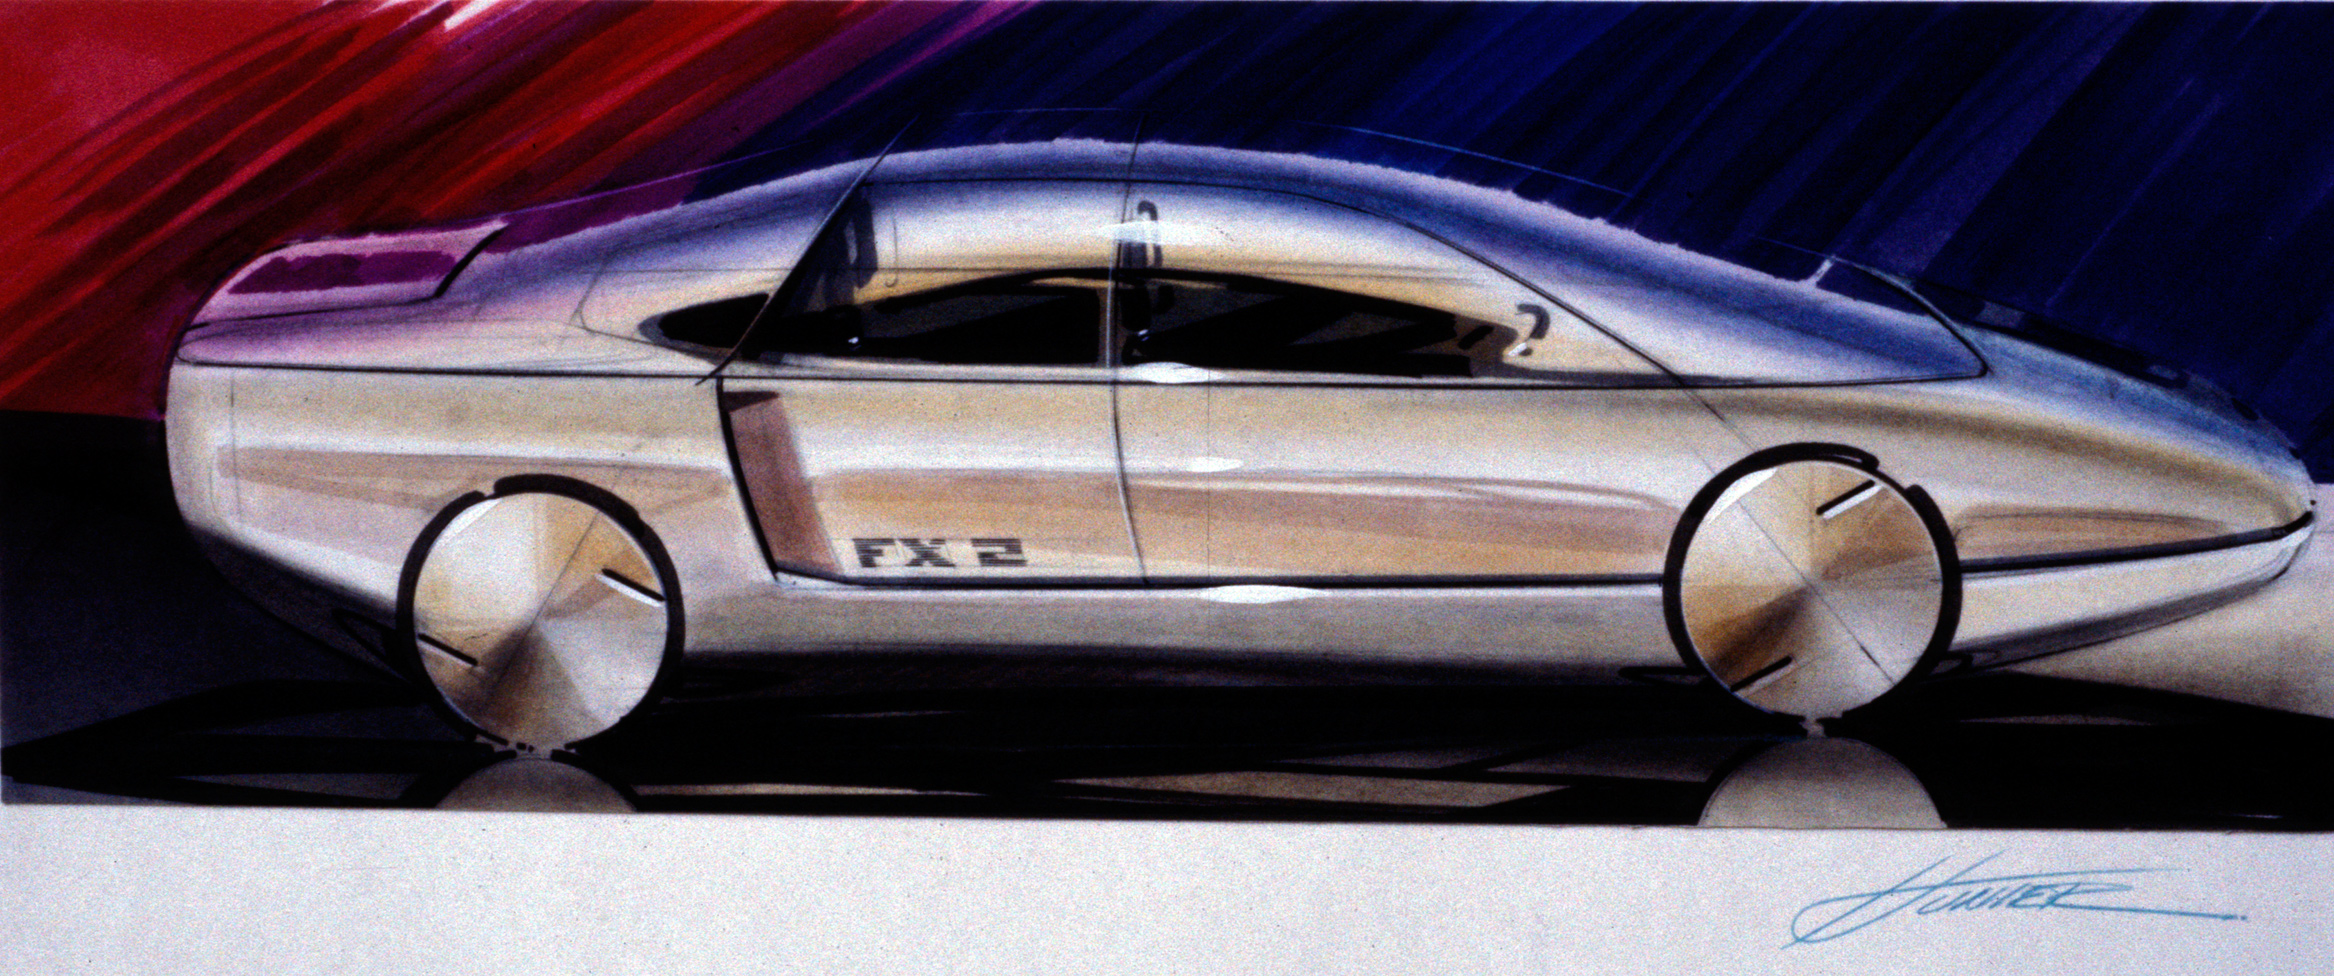 Toyota FX-2 Concept (1985; sketch by Kevin Hunter)